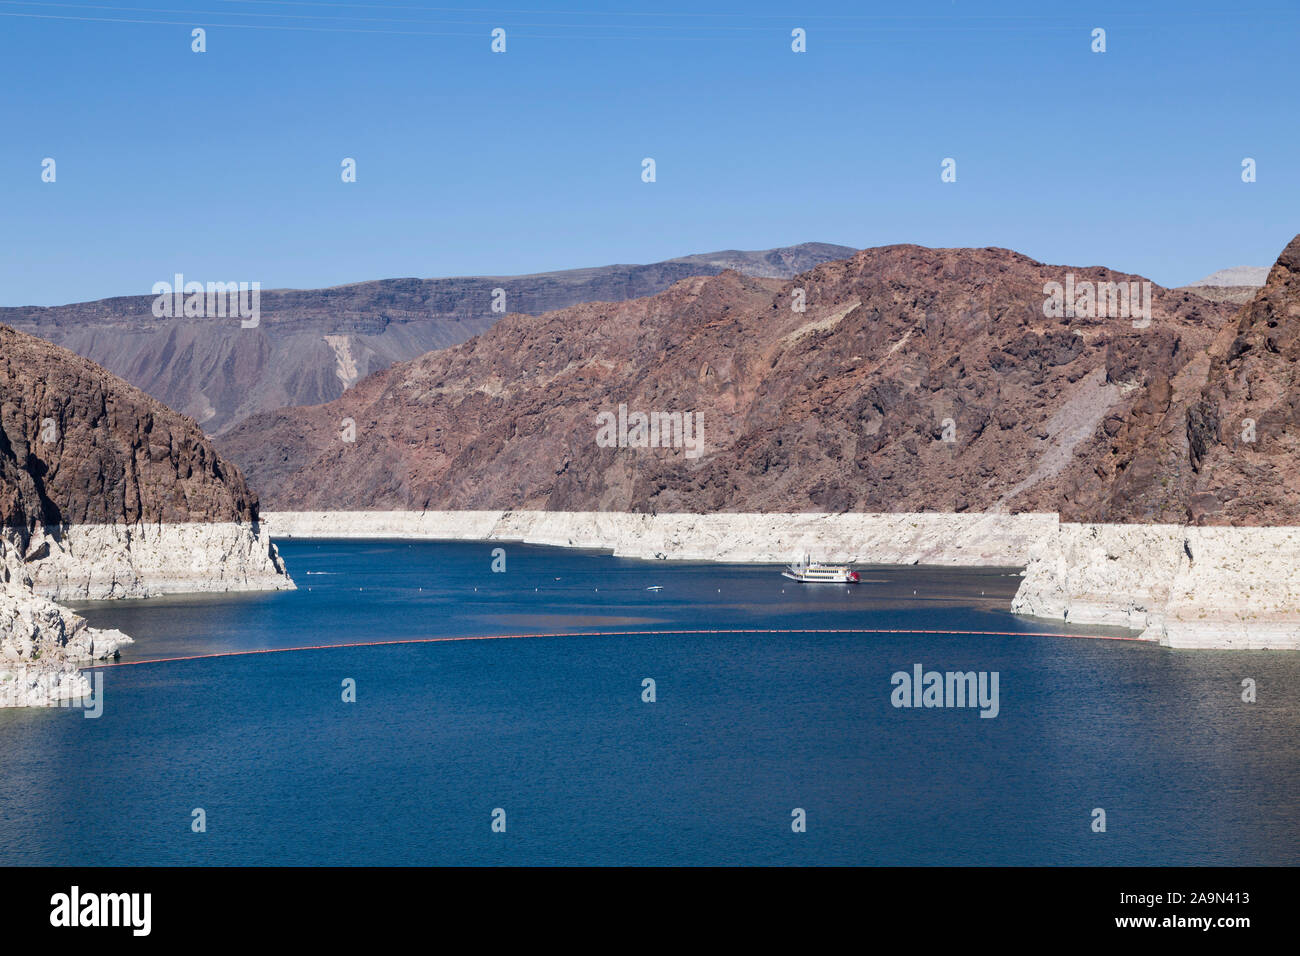 NEVADA, USA - May 21, 2012. Low water level during a period of drought at Lake Mead, Nevada and Arizona. Stock Photo